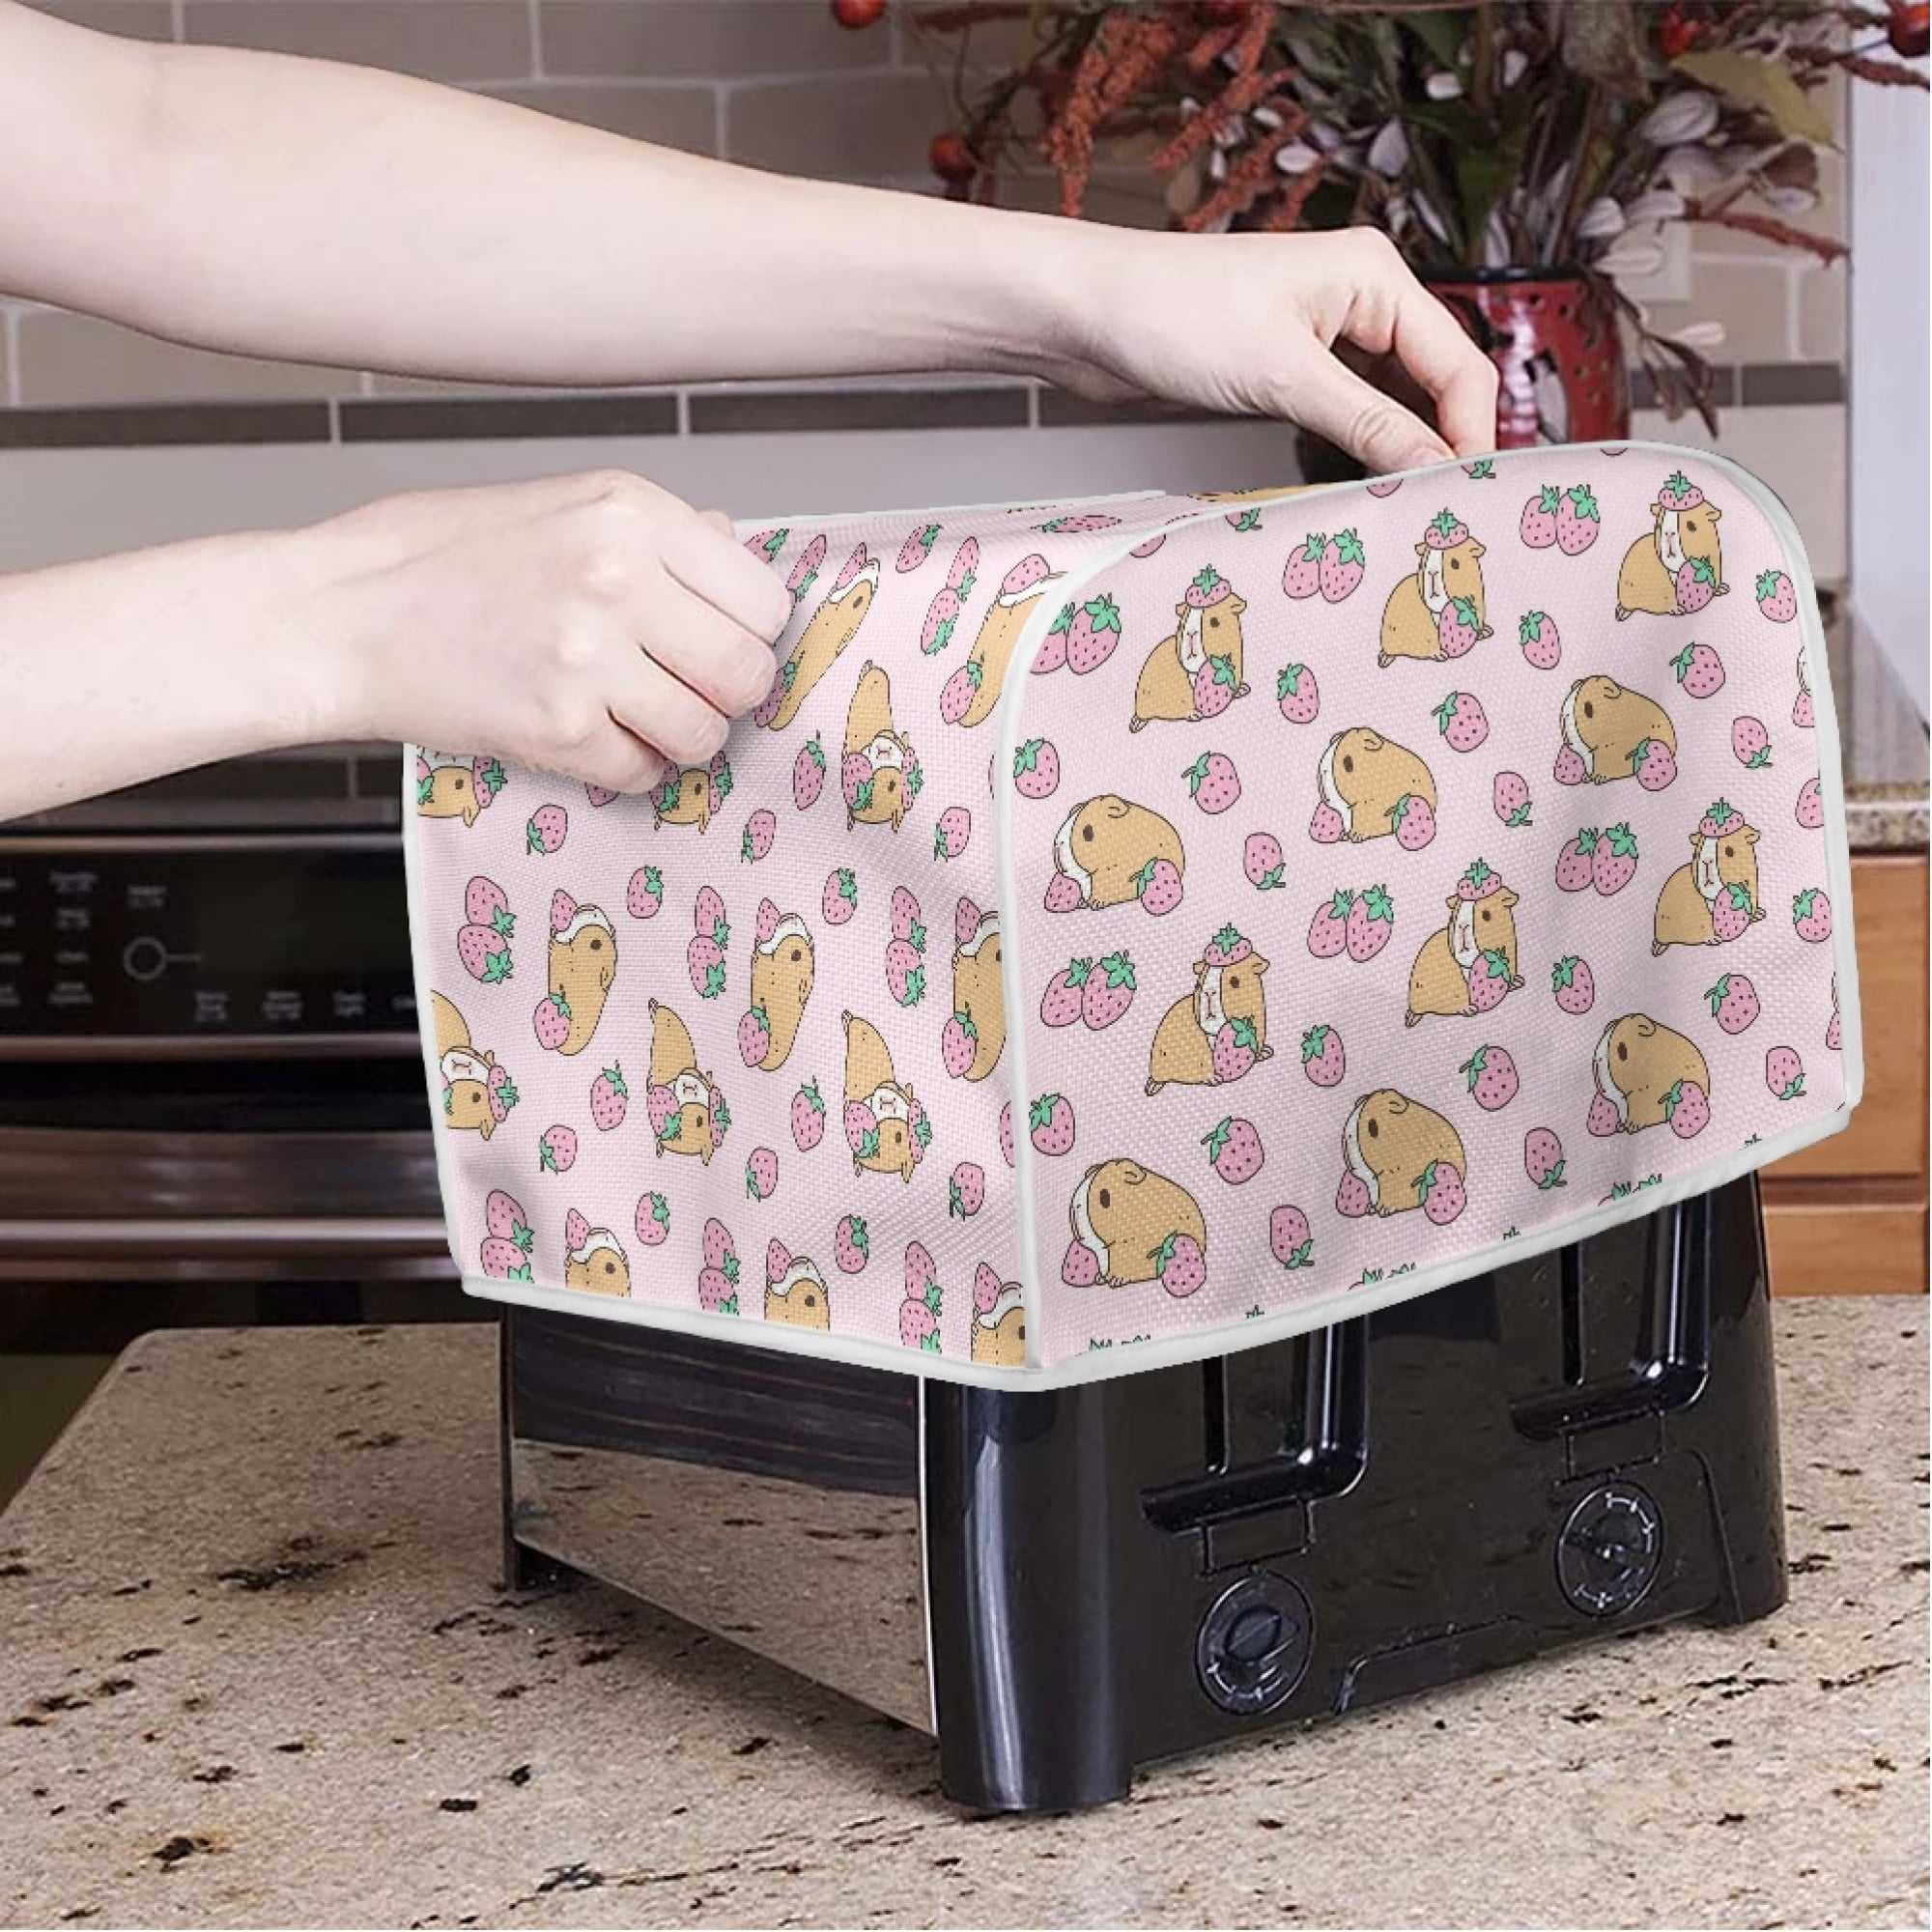 33 Best toaster cover ideas  toaster cover, sewing projects